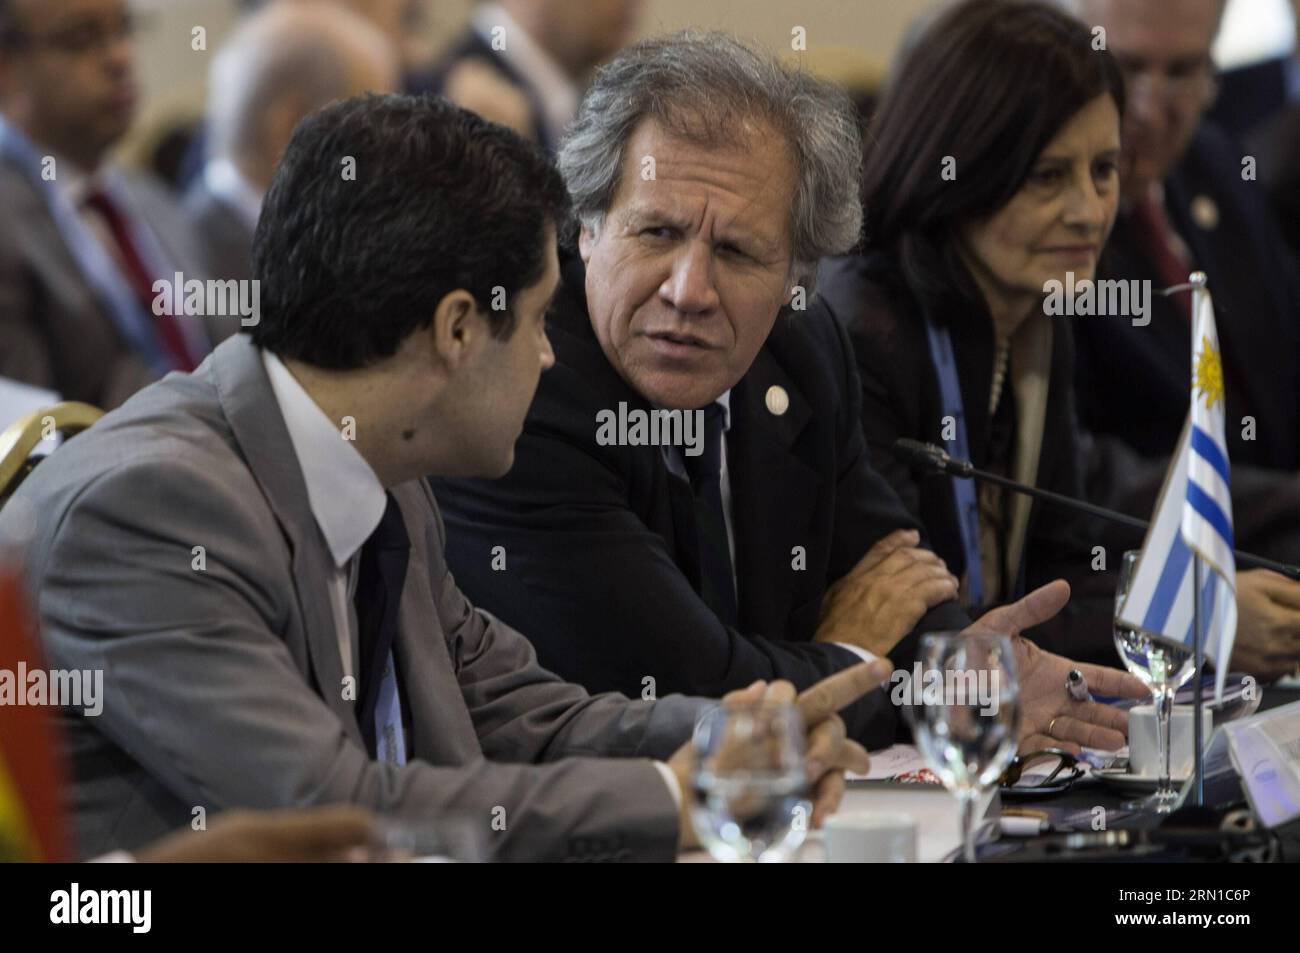 (141216) -- PARANA, Dec. 16, 2014 -- Uruguay s Foreign Minister Luis Almagro(C) participates in the regular meeting of the Common Market Council in the framework of the 47th Southern Common Market (MERCOSUR) trade bloc presidential summit, in Parana city, north of Buenos Aires, Argentina, on Dec. 16, 2014. The 47th Southern Common Market (MERCOSUR) trade bloc presidential summit will open on Wednesday in Parana. Martin Zabala) ARGENTINA-PARANA-MERCOSUR-SUMMIT e MARTINxZABALA PUBLICATIONxNOTxINxCHN   Parana DEC 16 2014 Uruguay S Foreign Ministers Luis Almagro C participates in The Regular Meeti Stock Photo